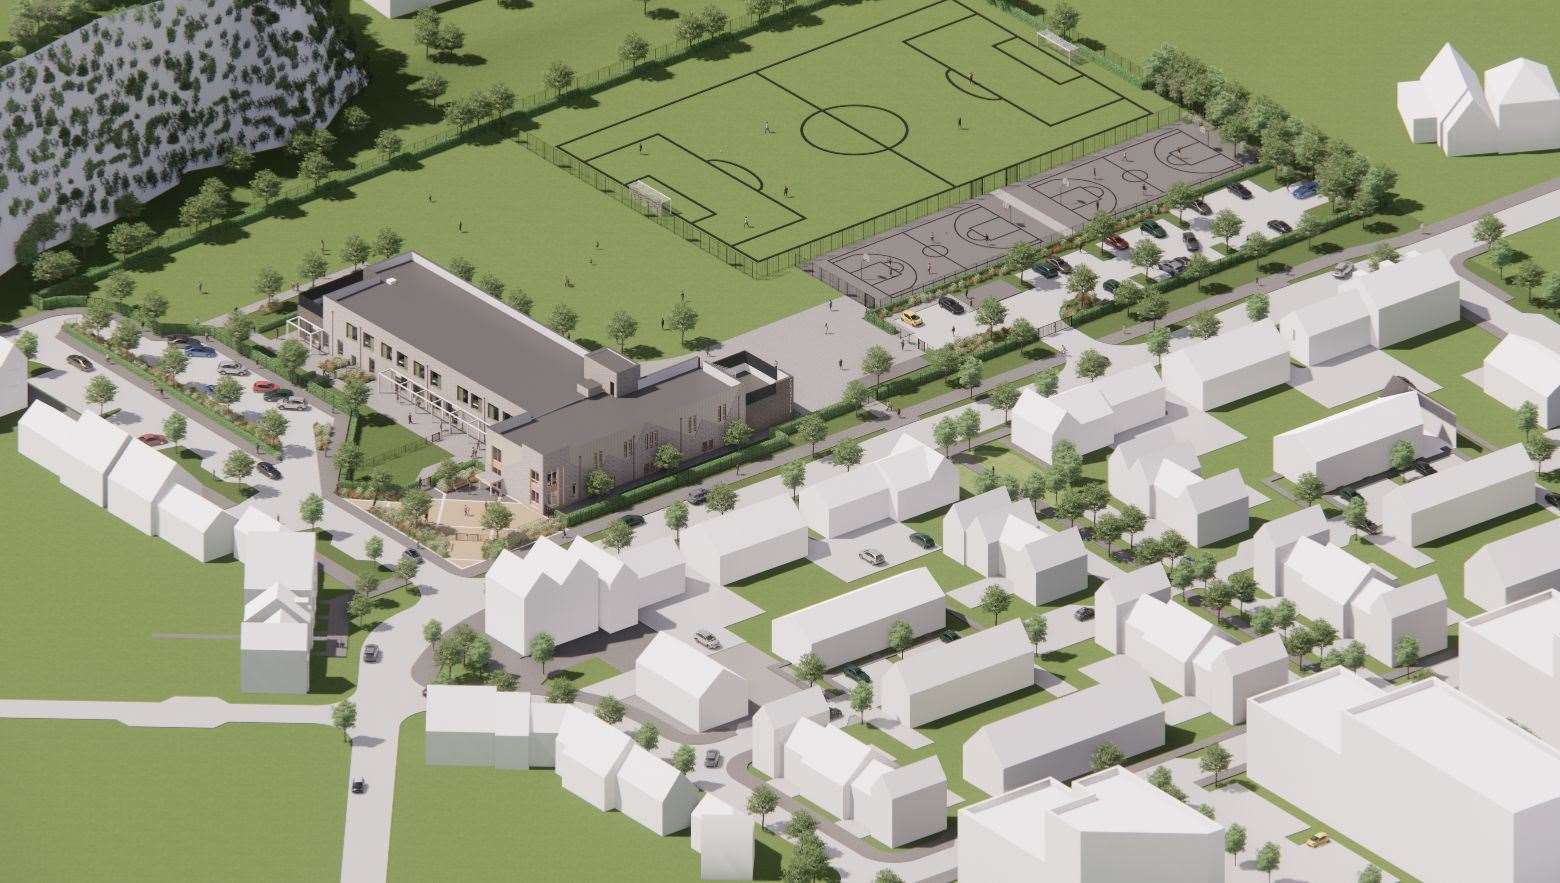 How the new Rosherville Primary Academy site will look from above